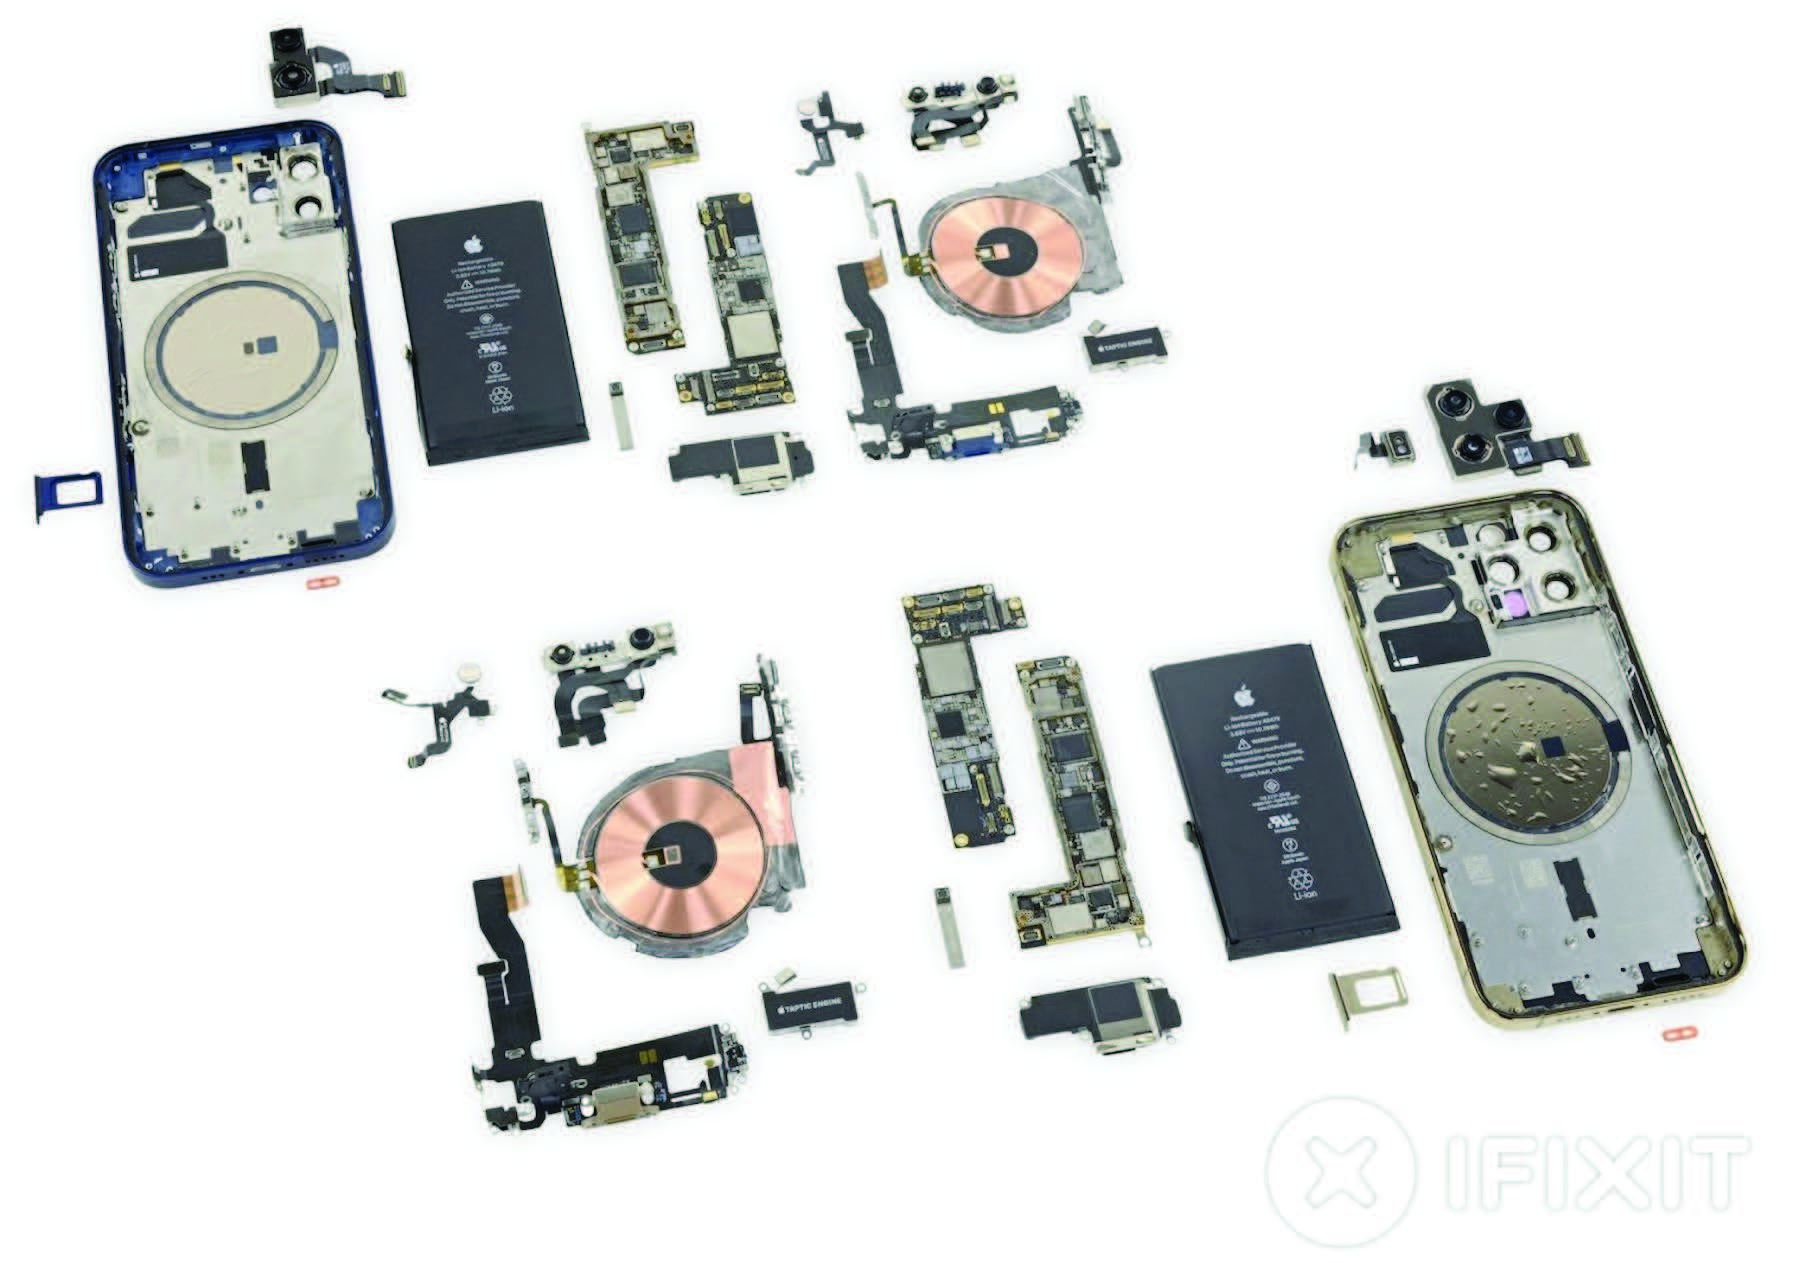 iFixit disassembled parts